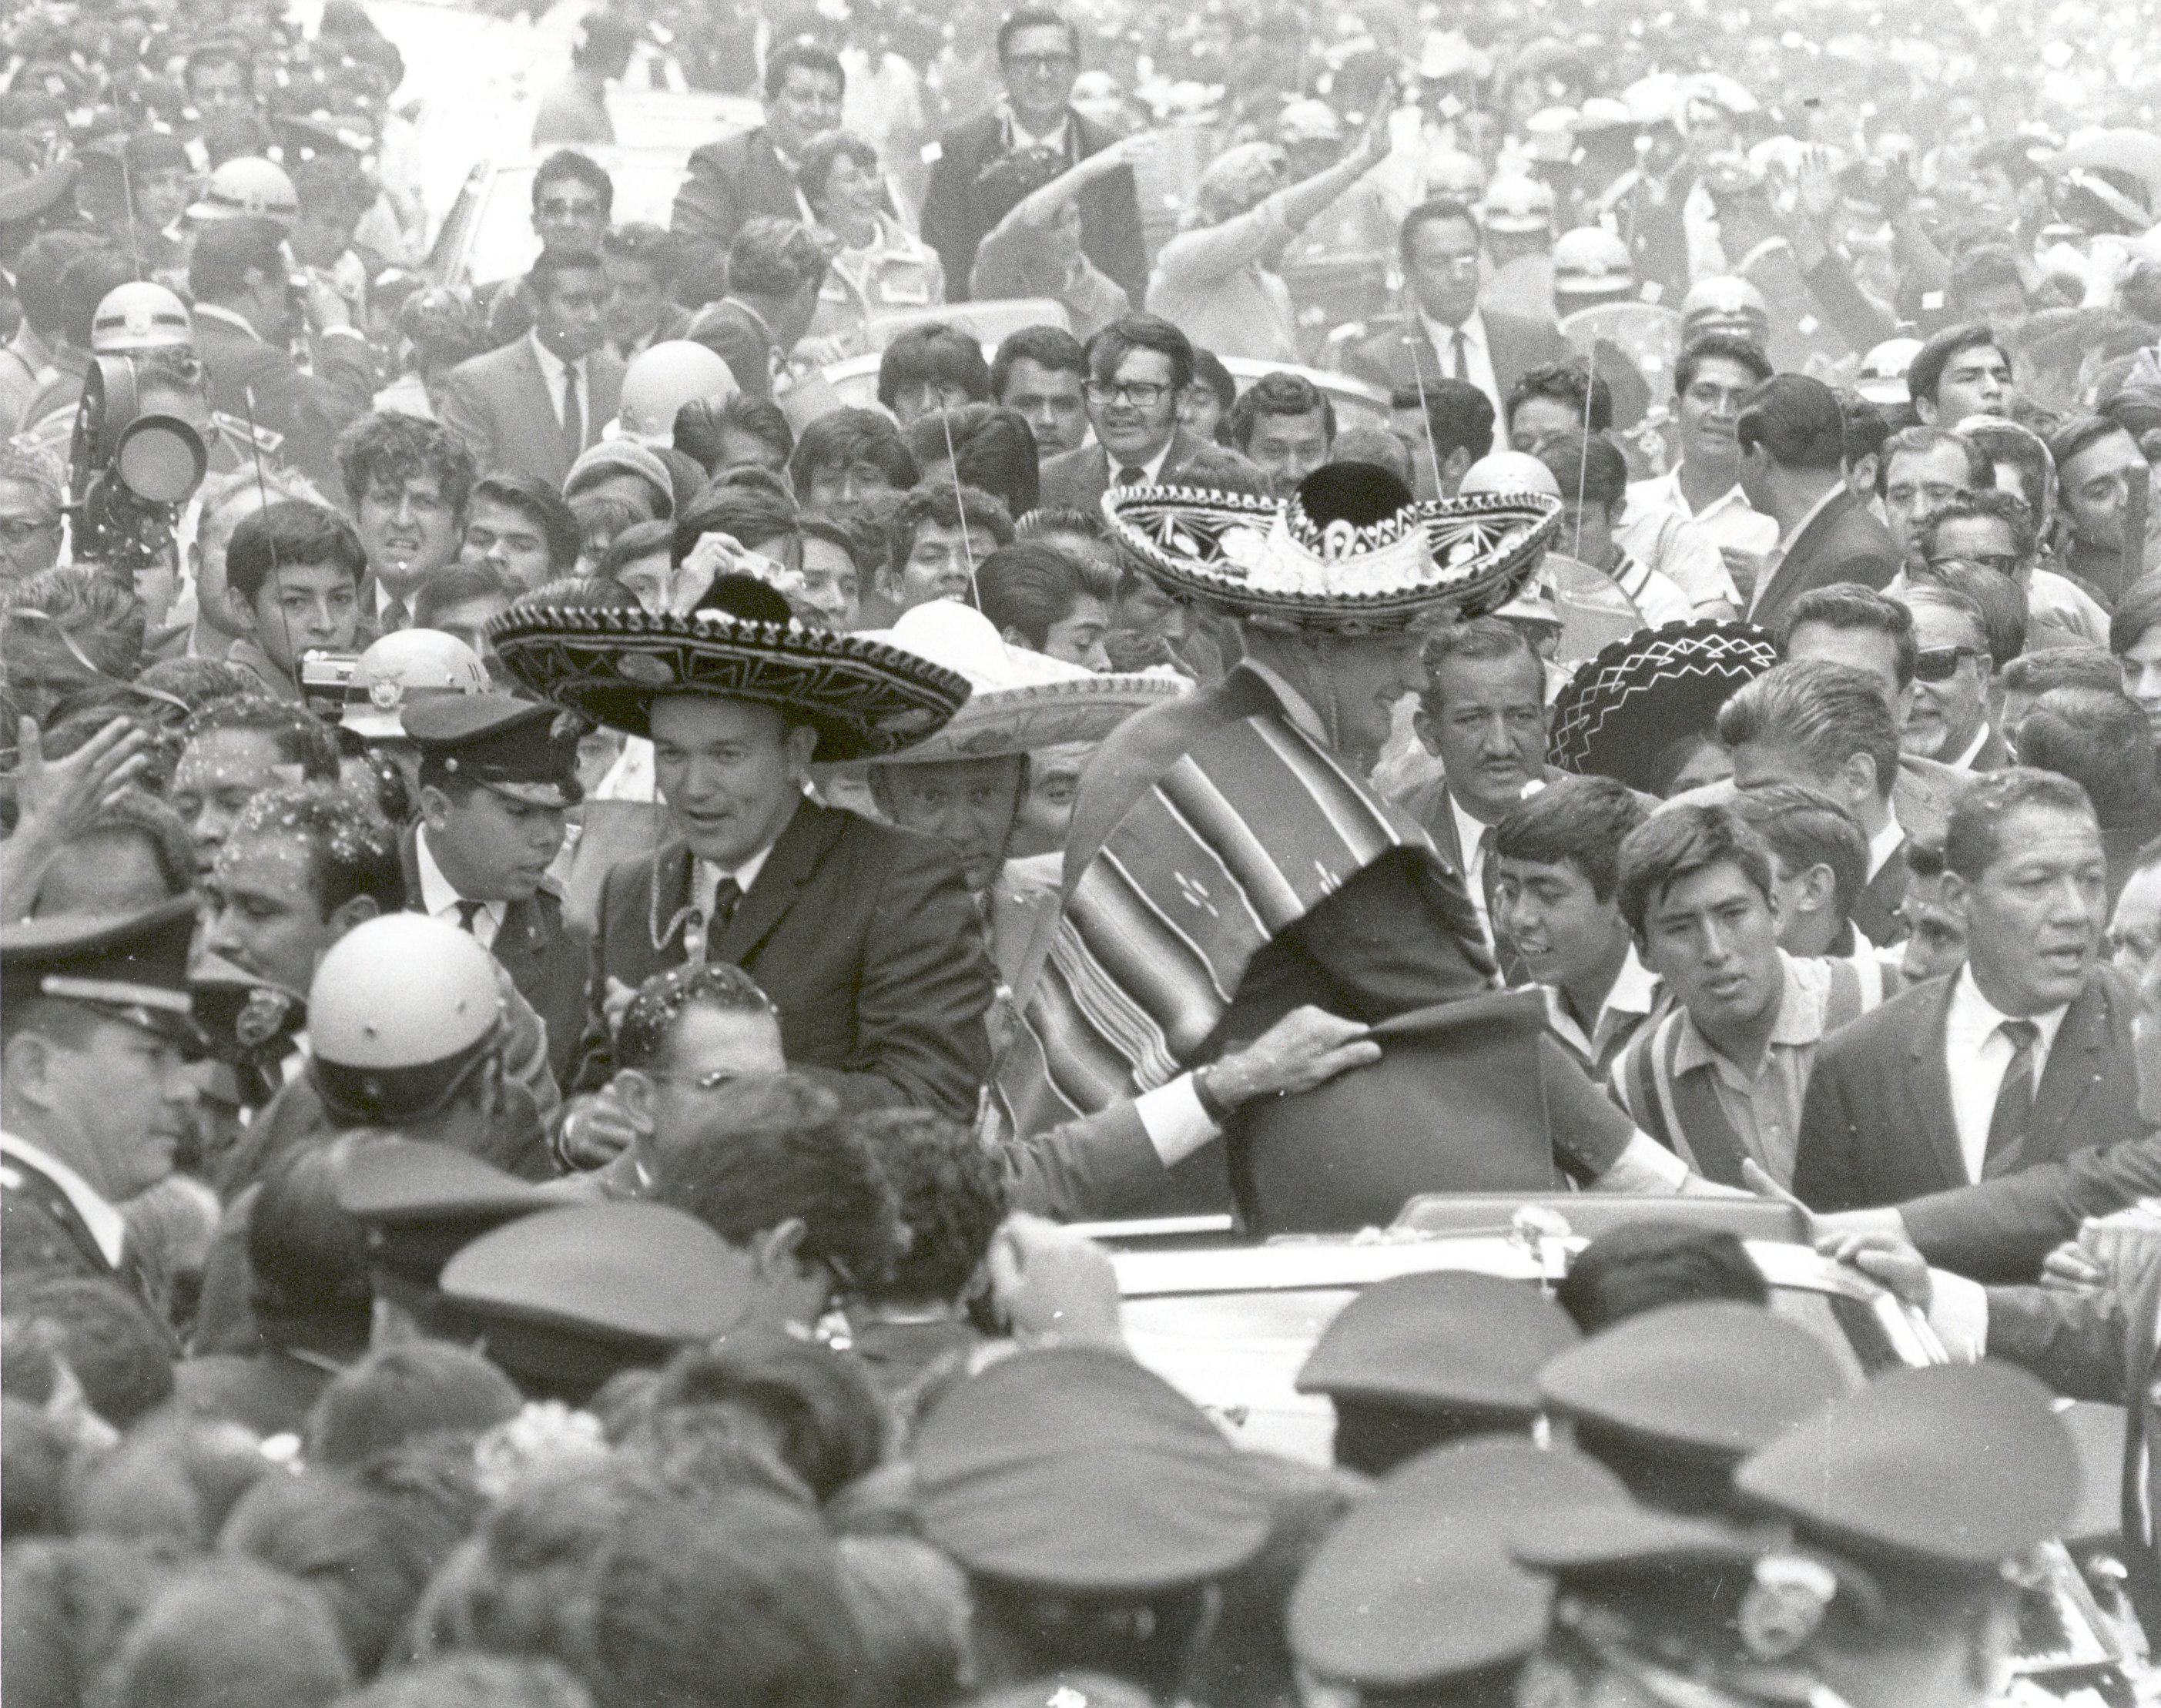 Featured image: 041 Back to Earth Apollo 11 in Mexico City - Read full post: Back to Earth: The Apollo 11 Astronauts Tour After the Moon Landing